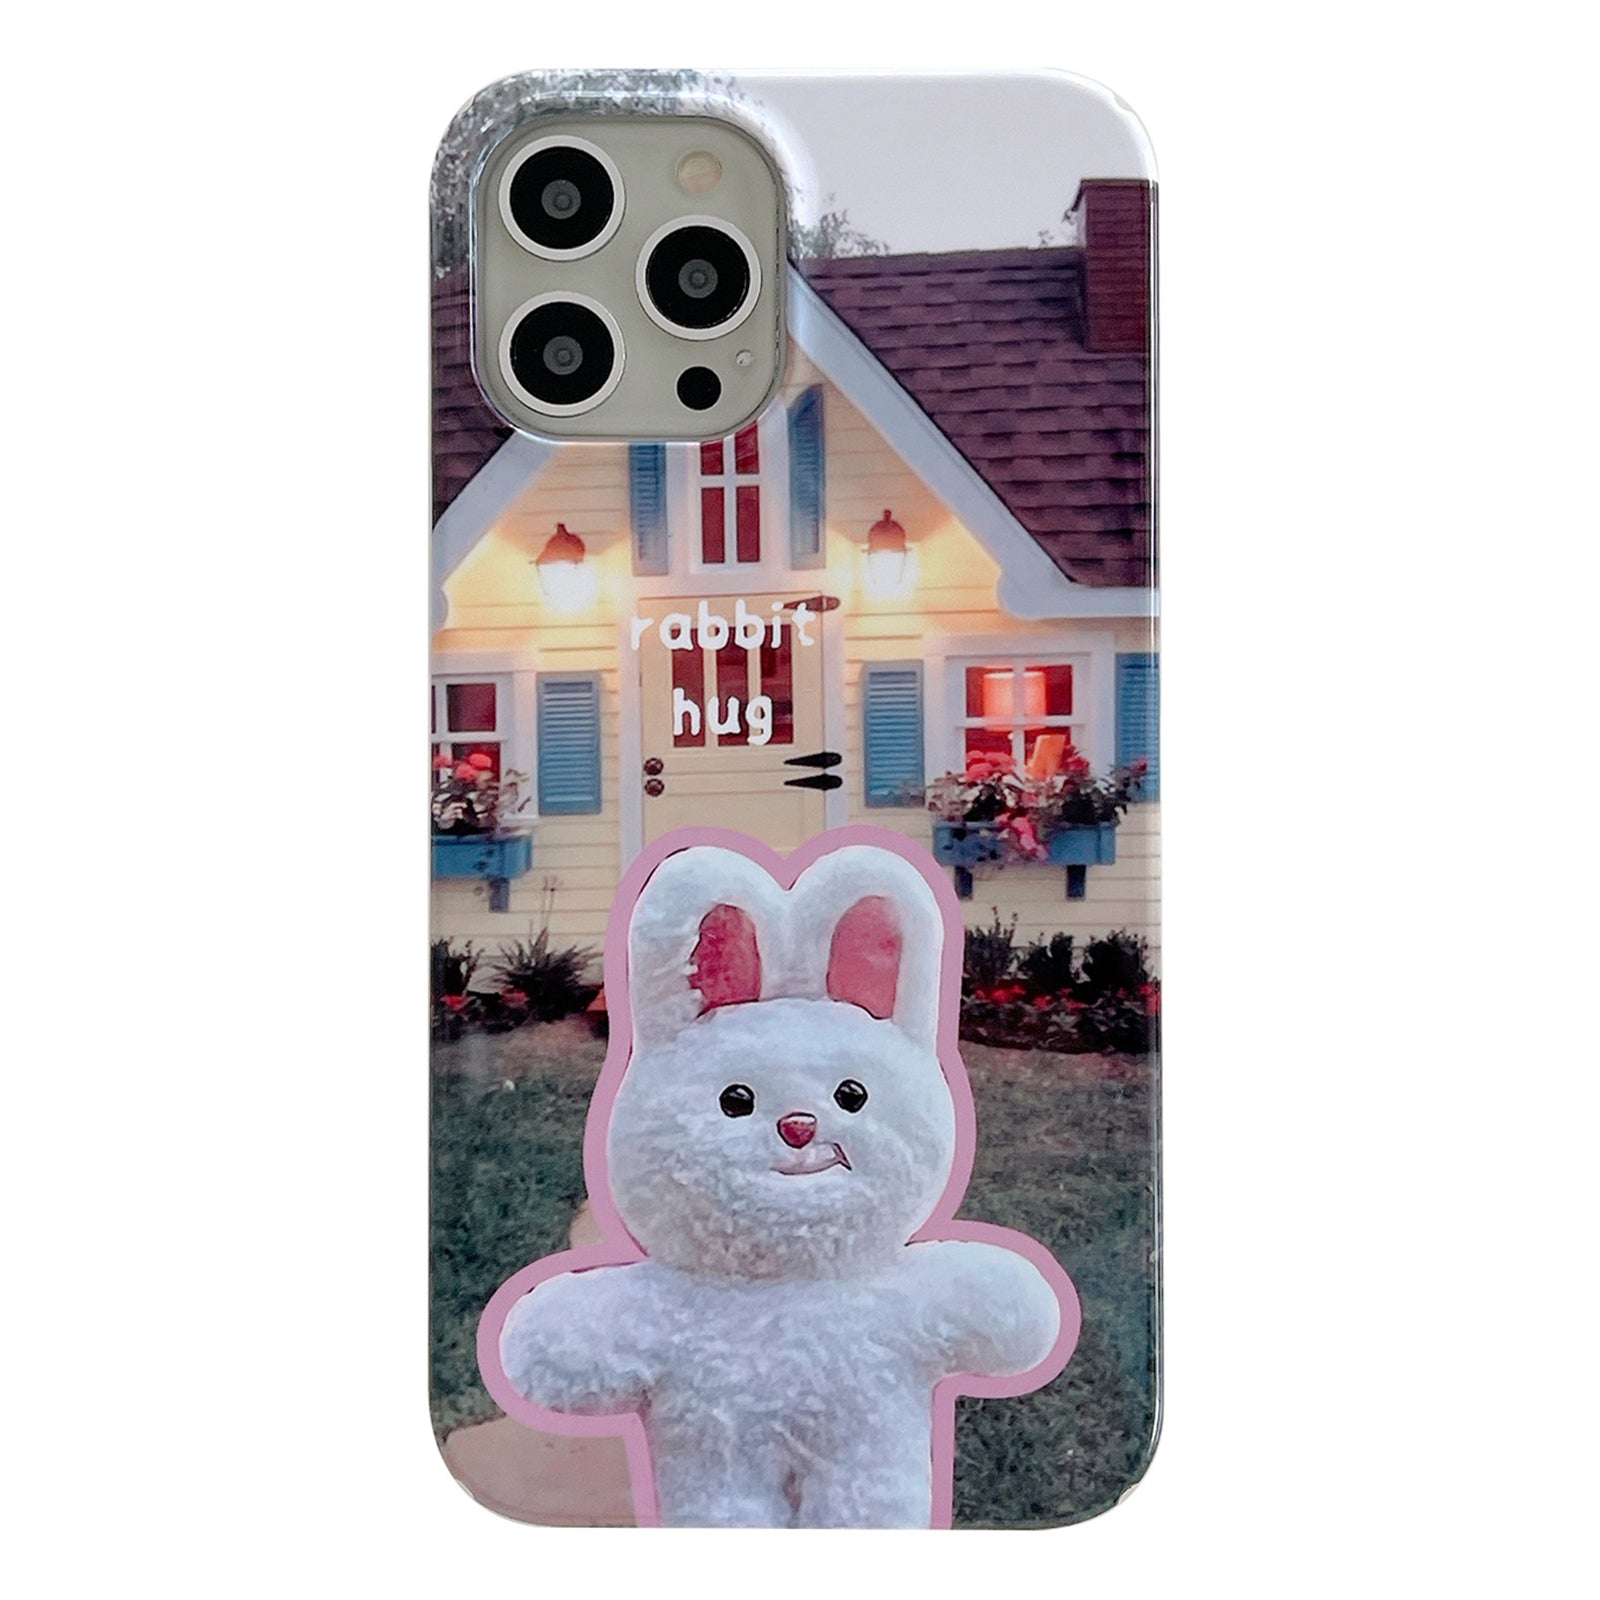 Uniqkart for iPhone 12 Pro Max 6.7 inch Hard PC Phone Case Pattern Printing Protective Glossy Phone Shell - Rabbit Hug